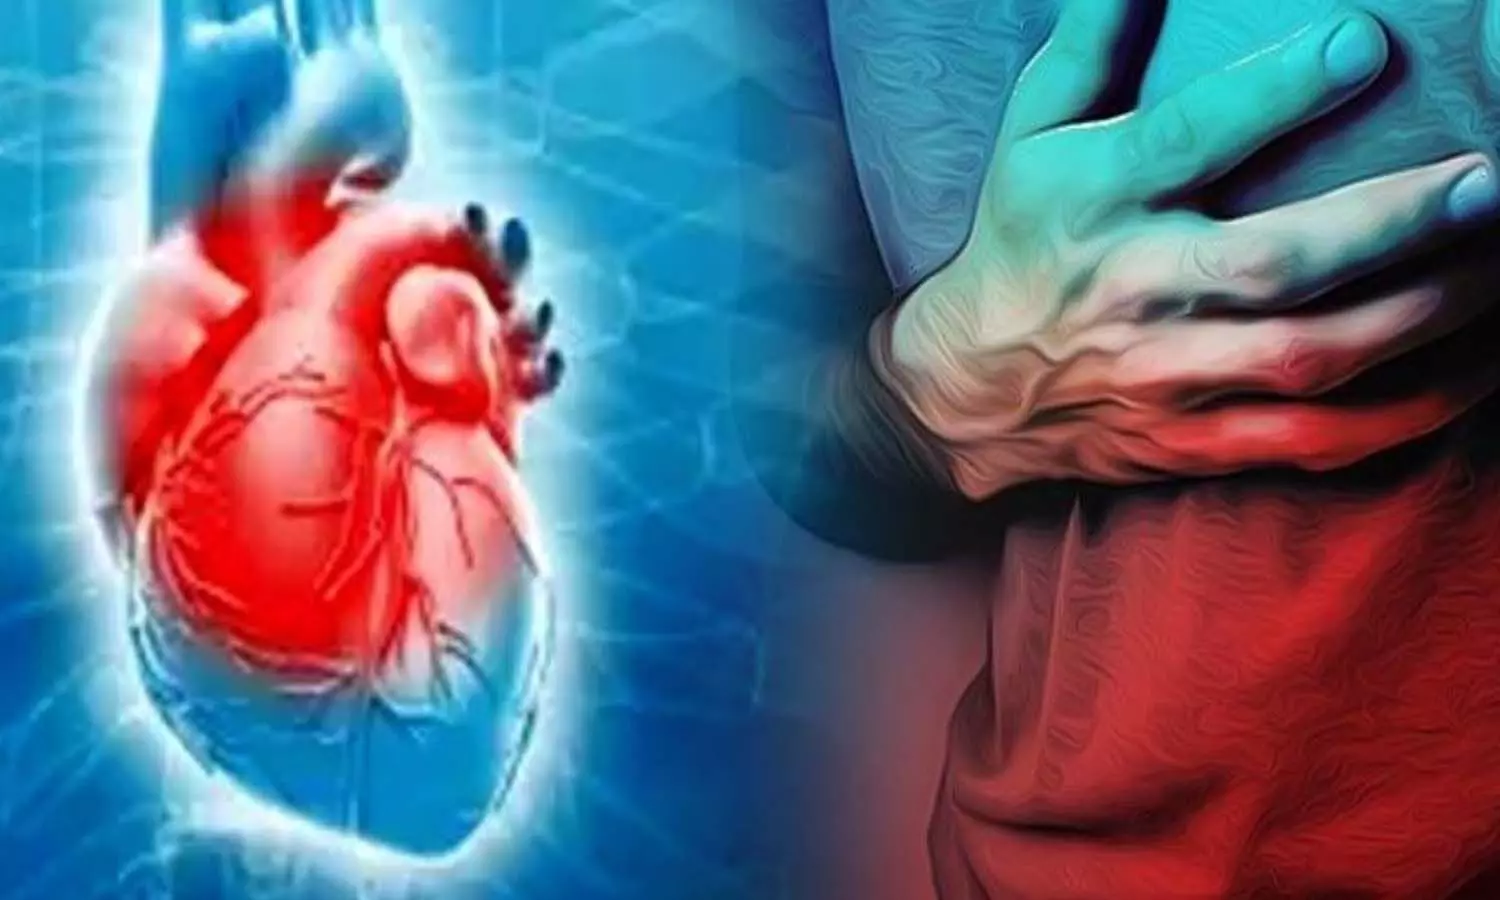 Cardiac Arrest: What is the difference between a heart attack and a cardiac arrest, why is life lost within a few minutes?